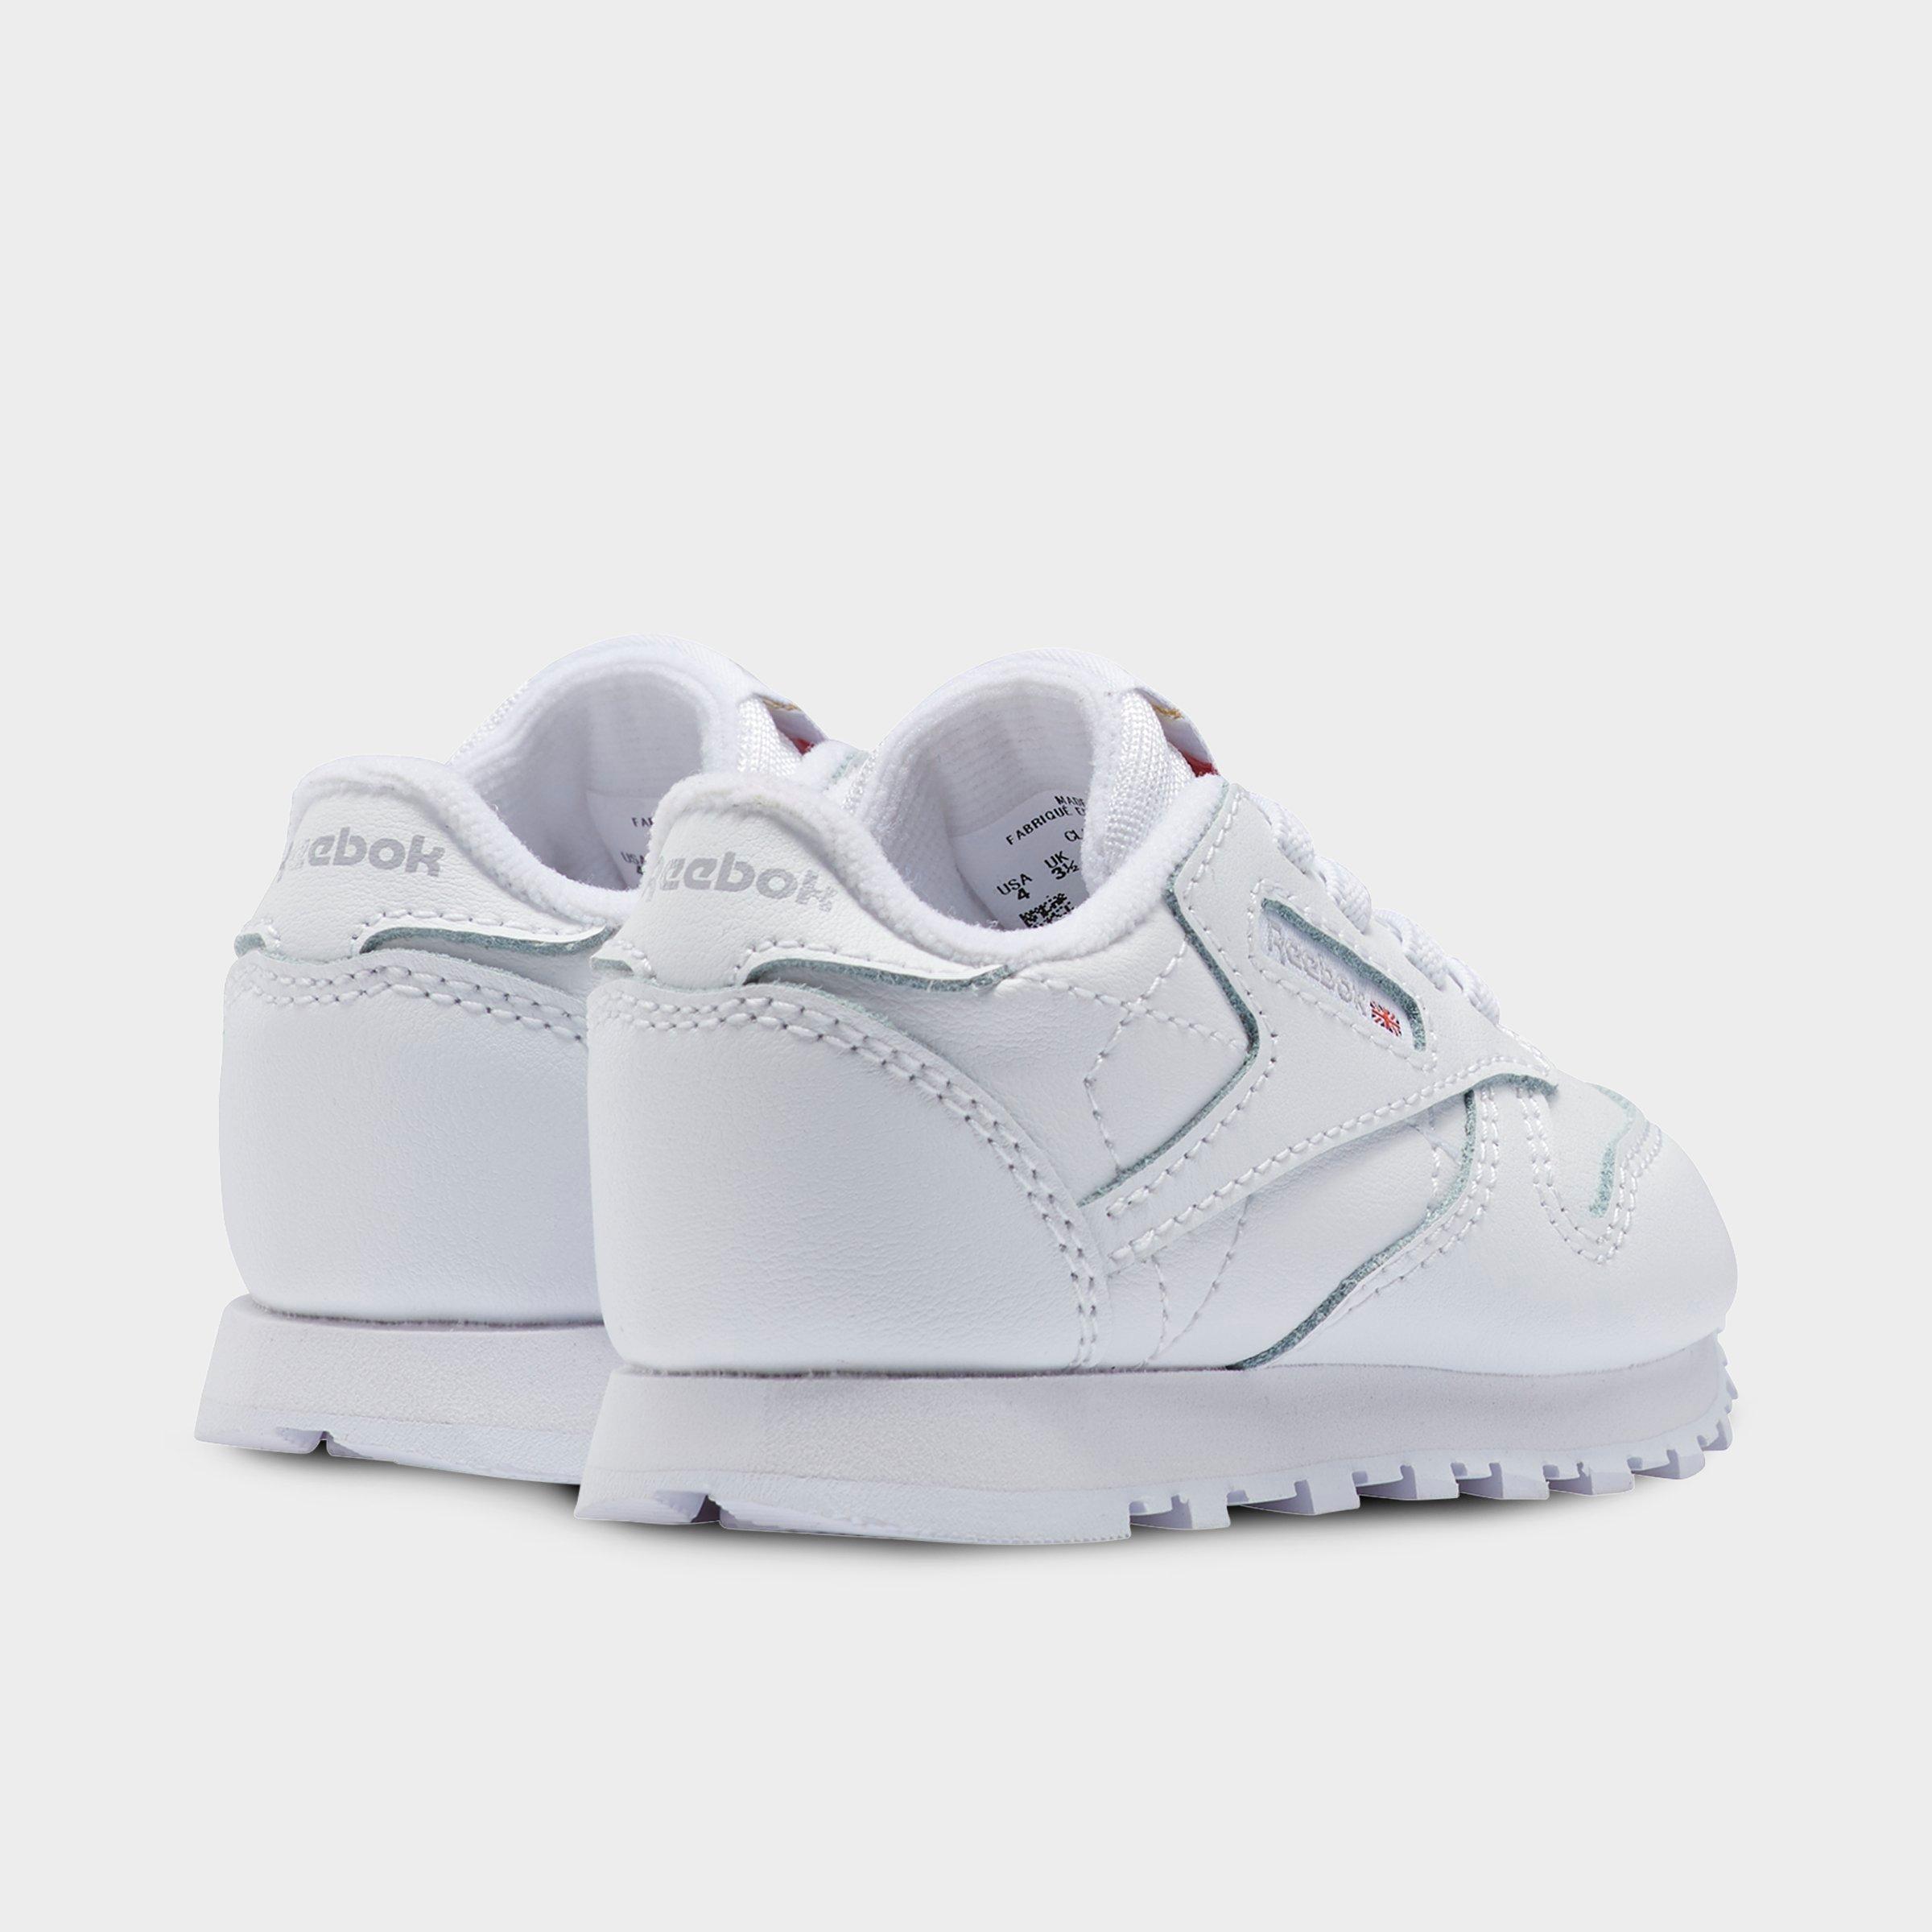 Reebok Classic Leather White Size 9 FZ2093 TODDLER / BABY/ INFANT Shoes